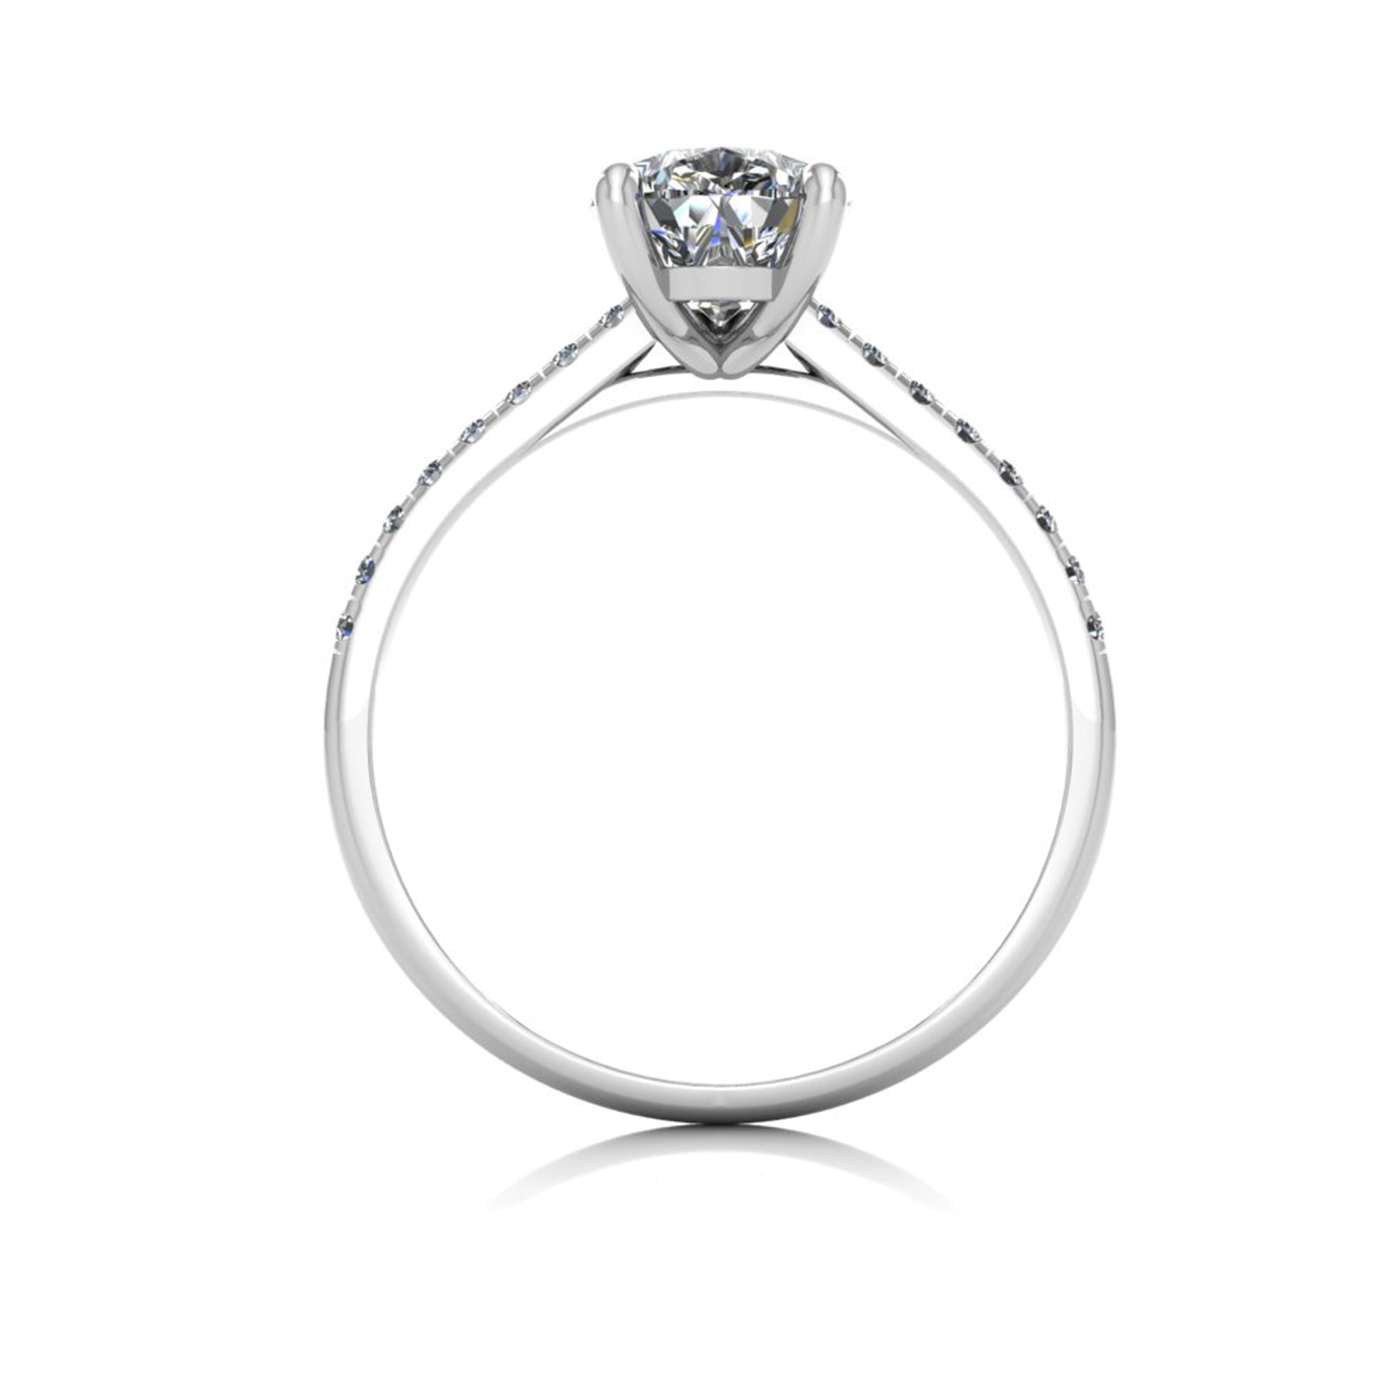 18k white gold 1,50 ct 3 prongs pear diamond engagement ring with whisper thin pavÉ set band